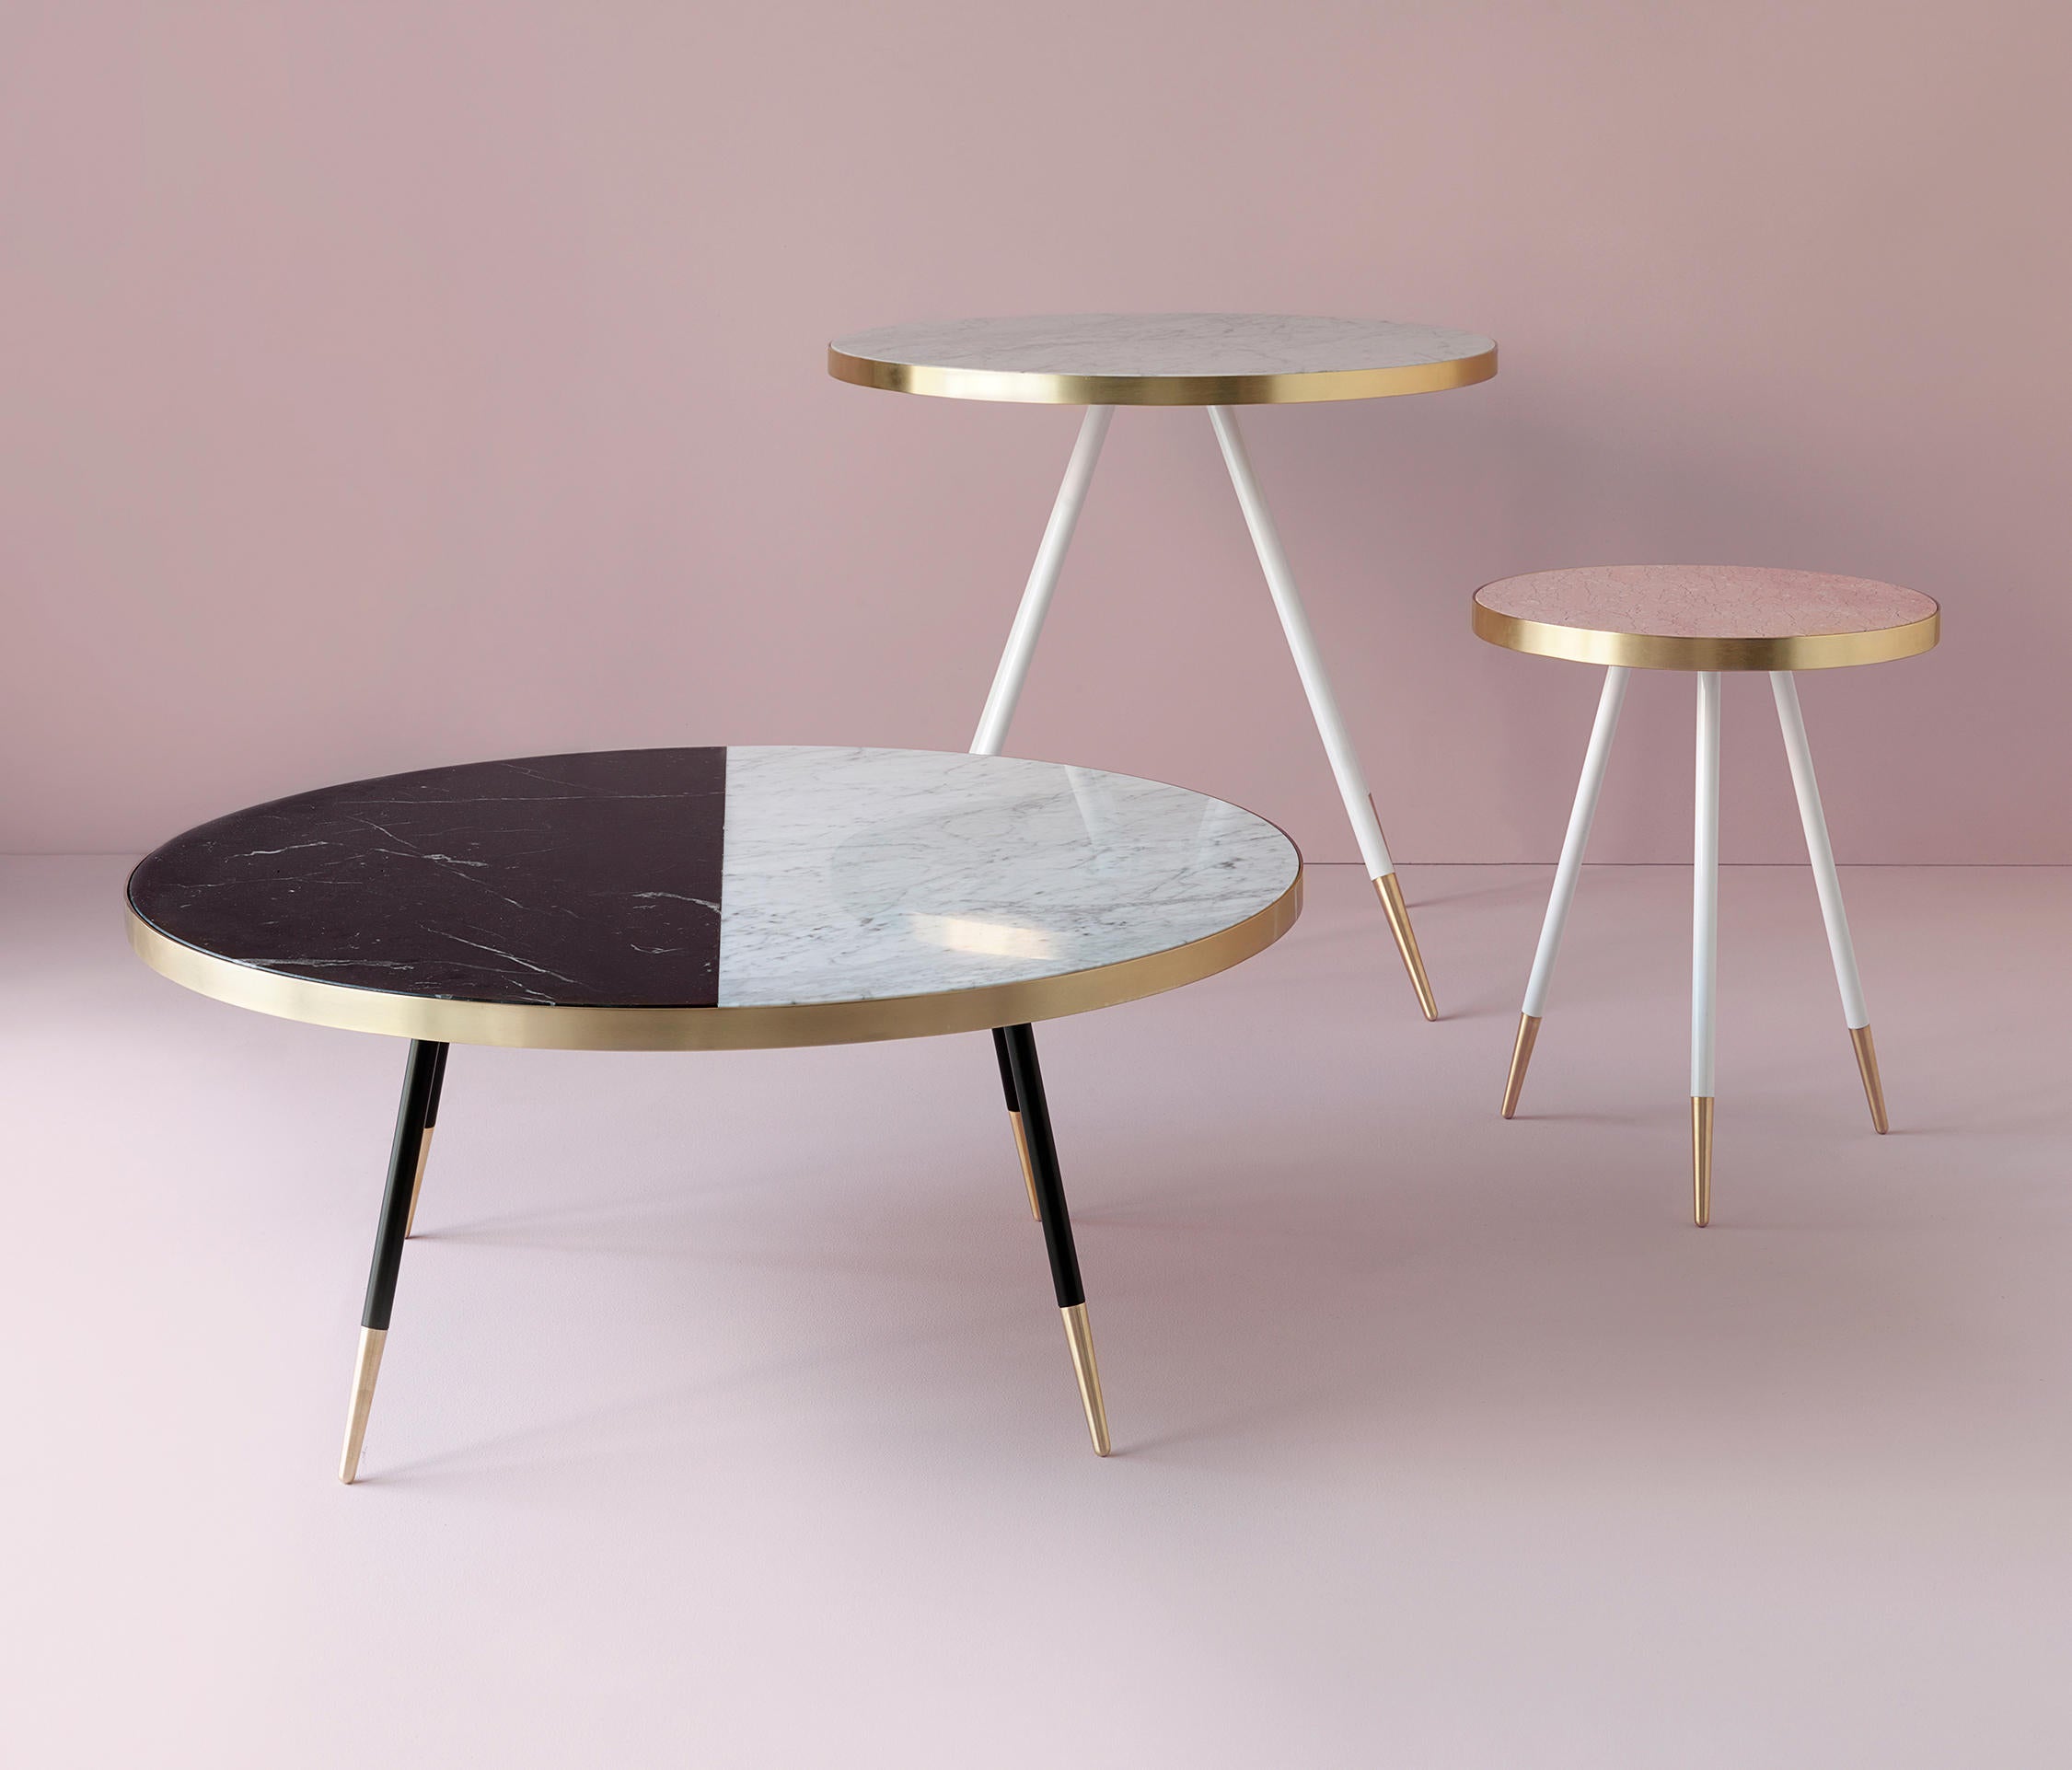 Band marble coffee table | Architonic